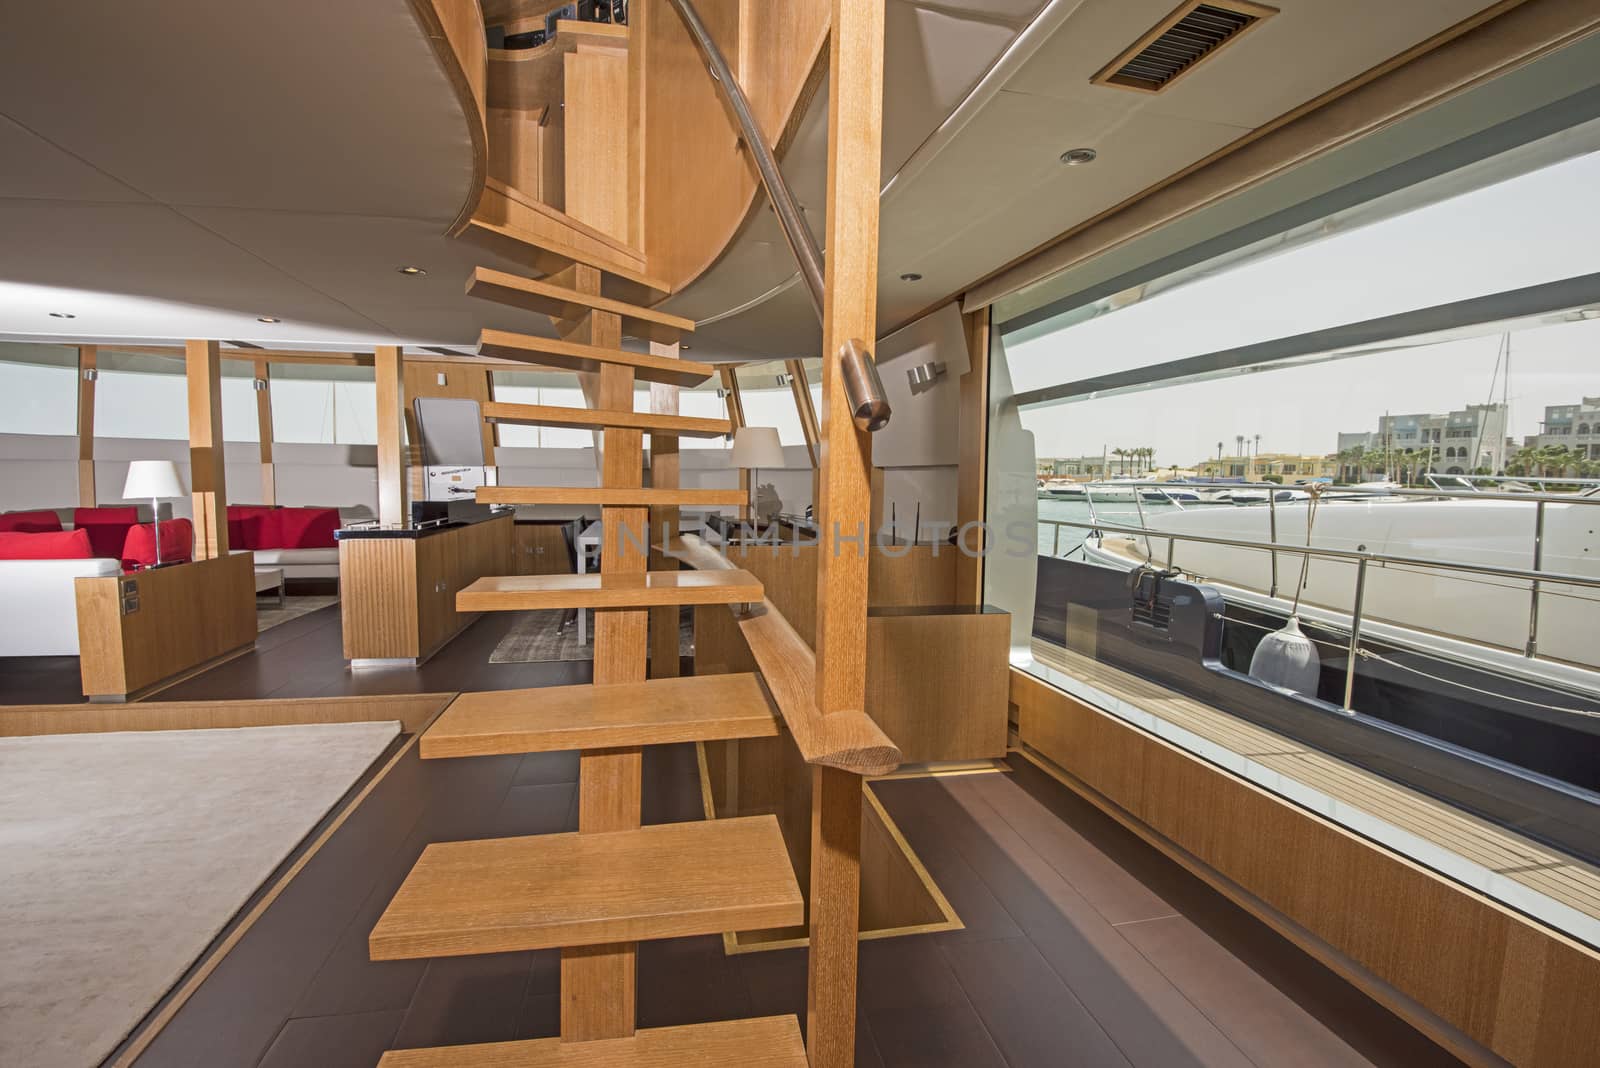 Wooden curved staircase in salon area of large luxury motor yacht